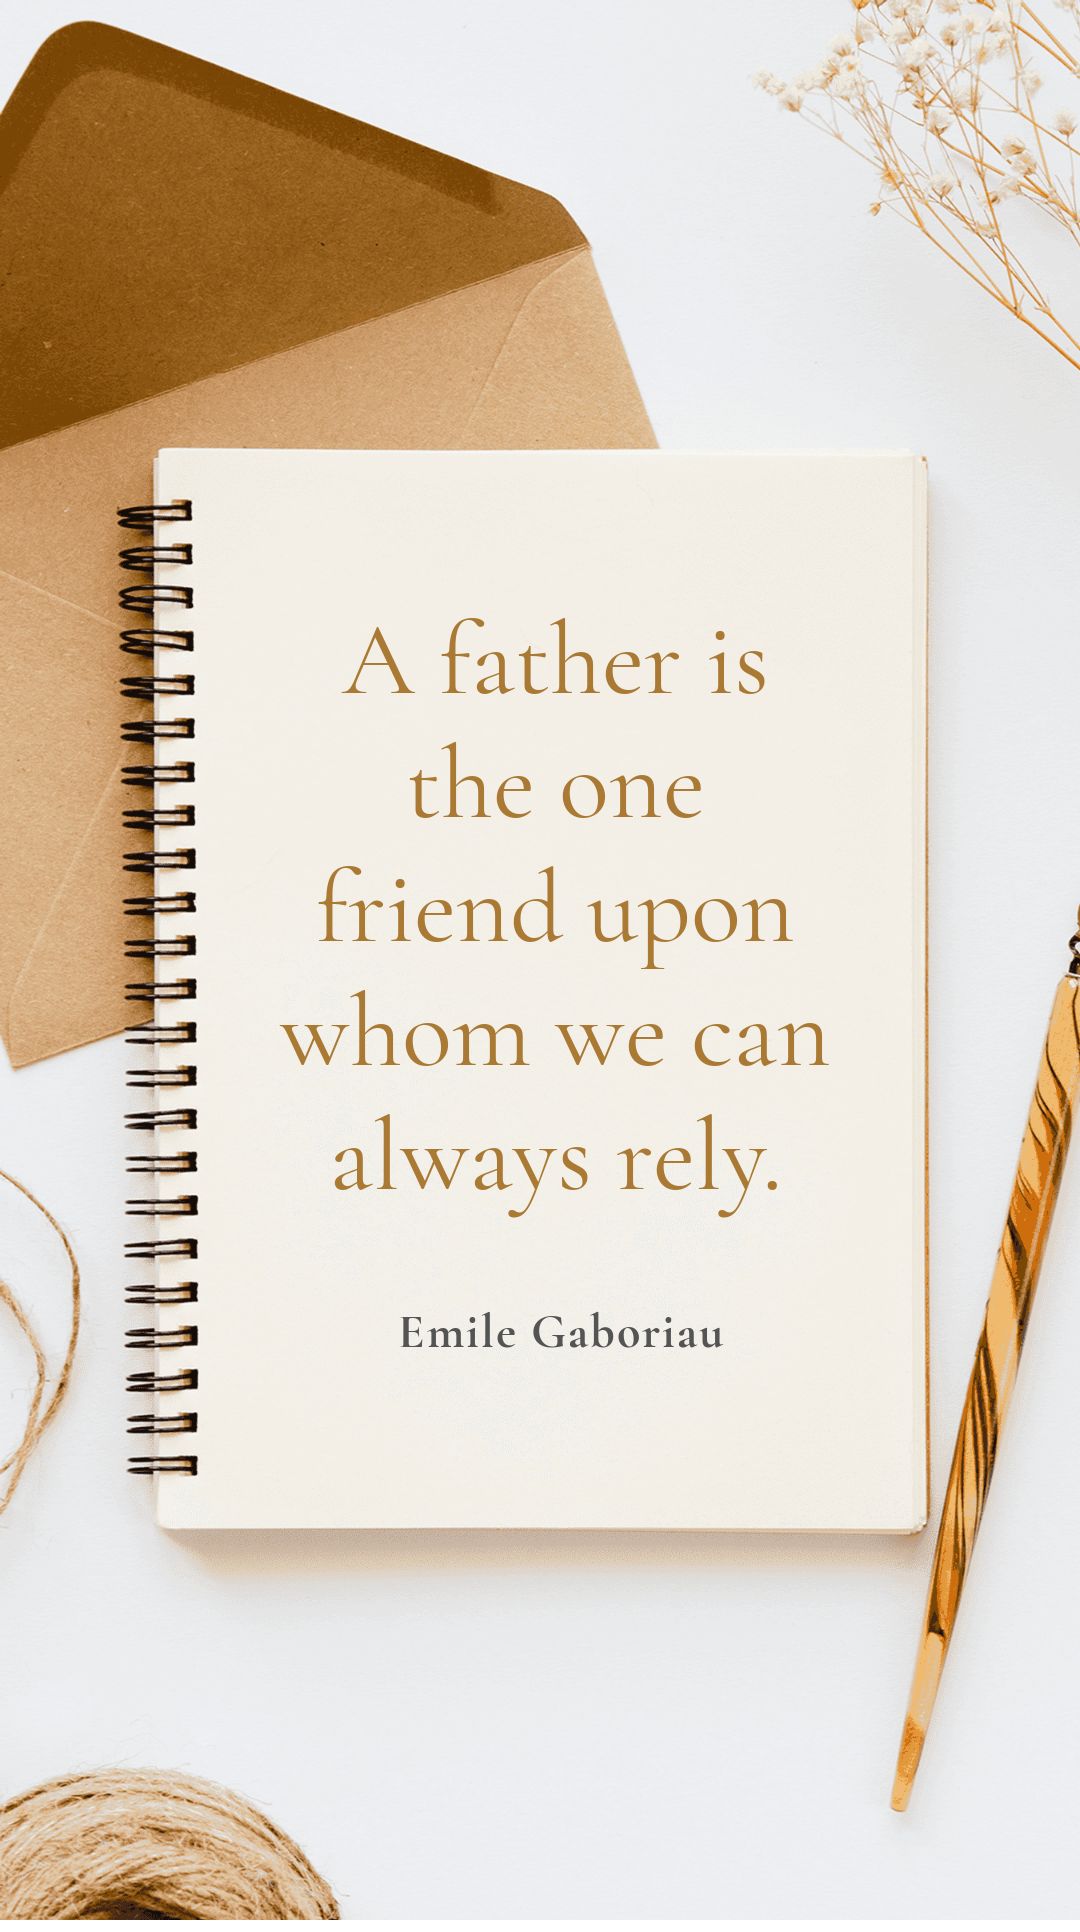 Free Emile Gaboriau - A father is the one friend upon whom we can always rely. in JPG